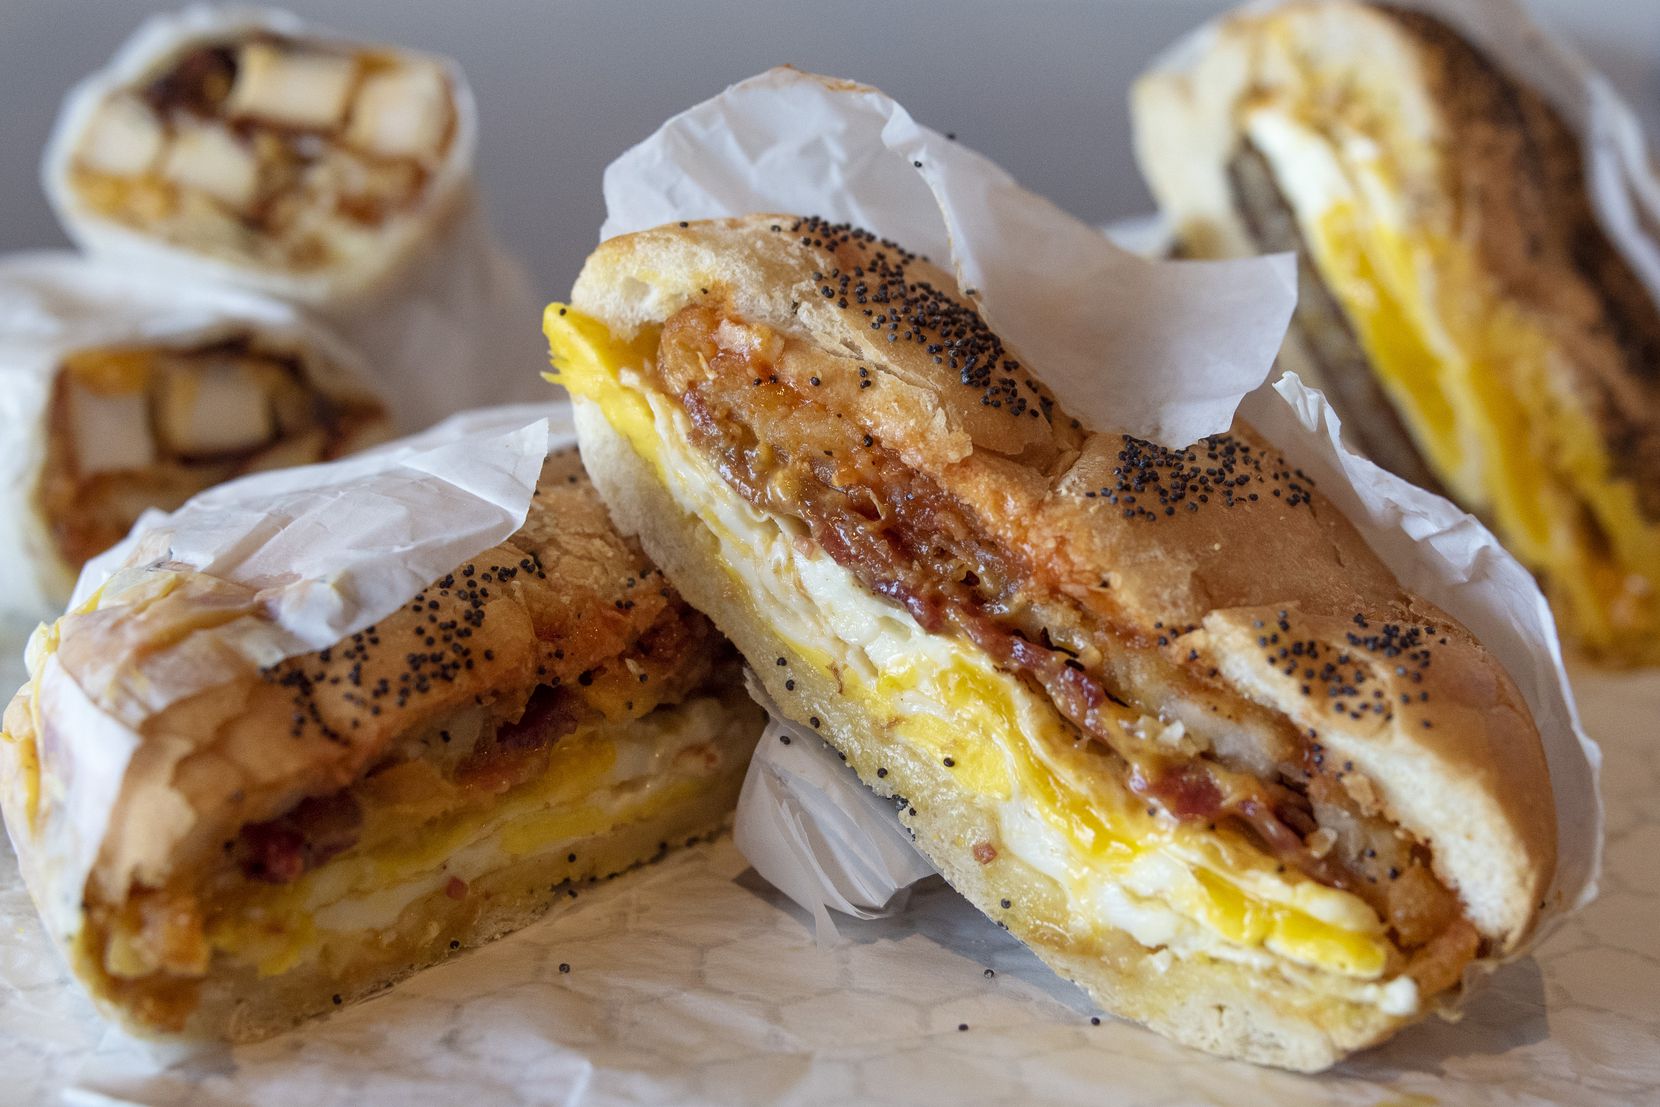 The Shug is a breakfast sandwich made with with bacon, egg, cheese and a hash brown on a...